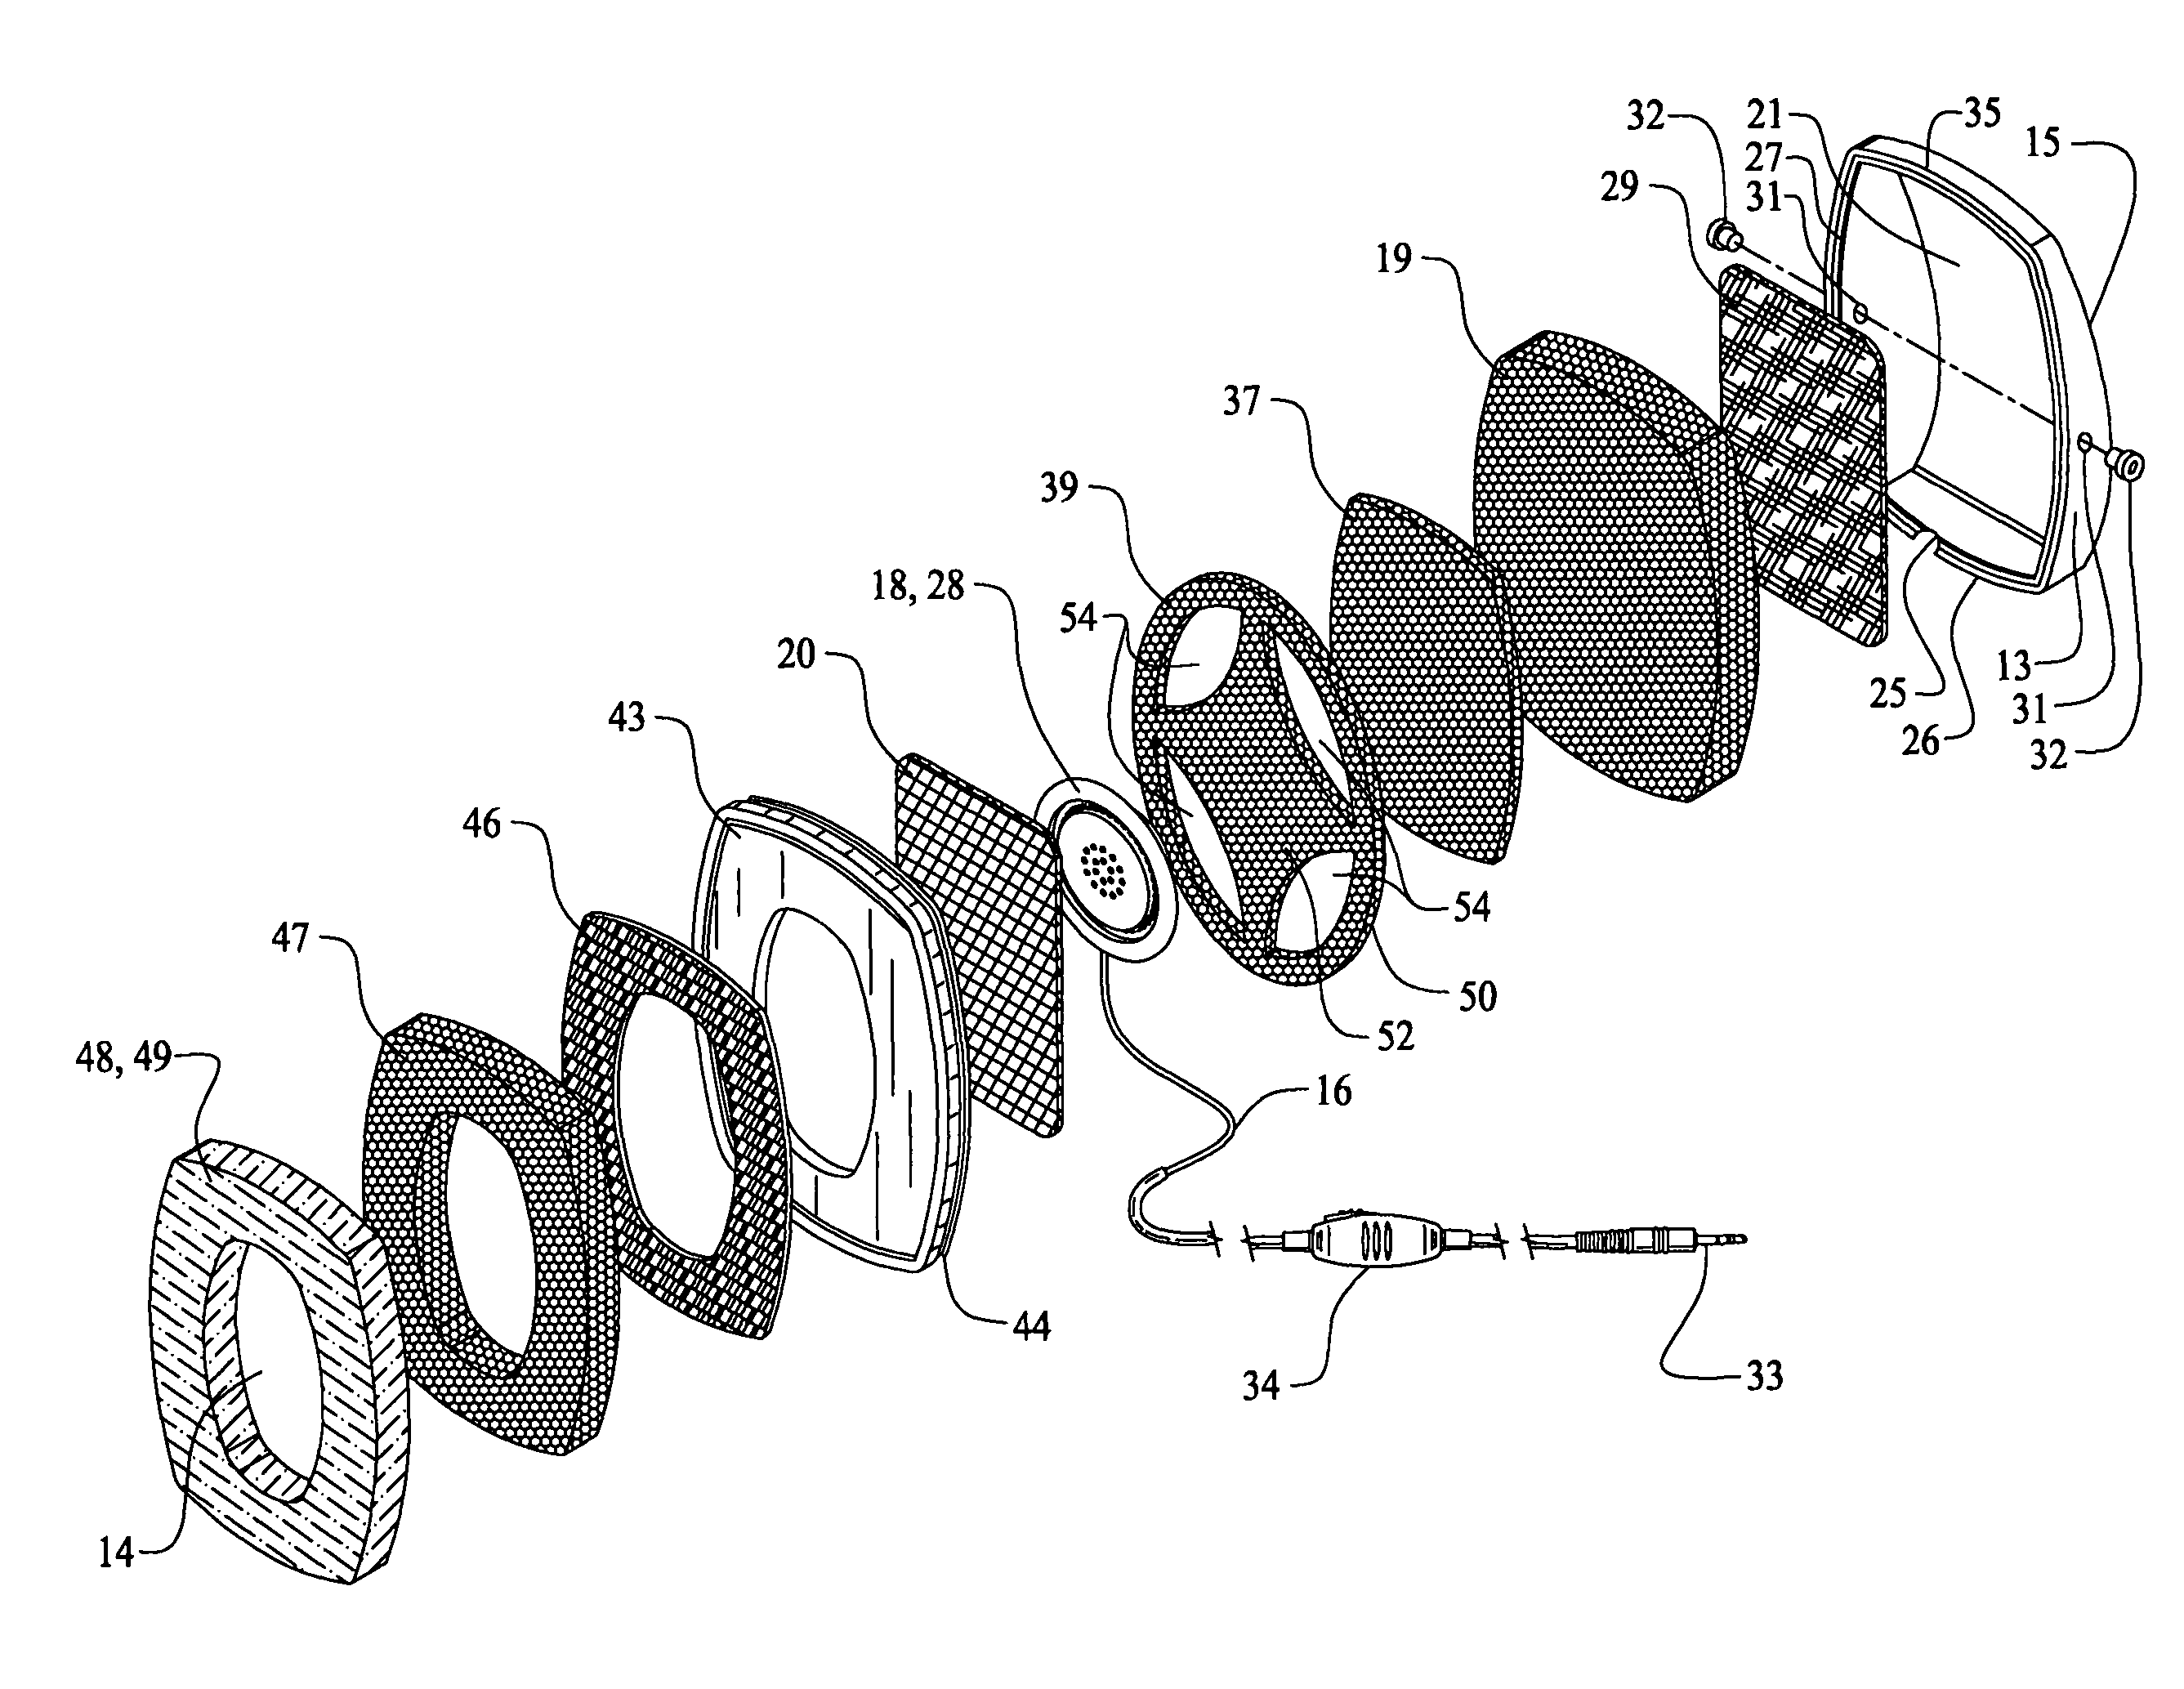 Ambient noise isolation audio headphones having a layered dampening structure